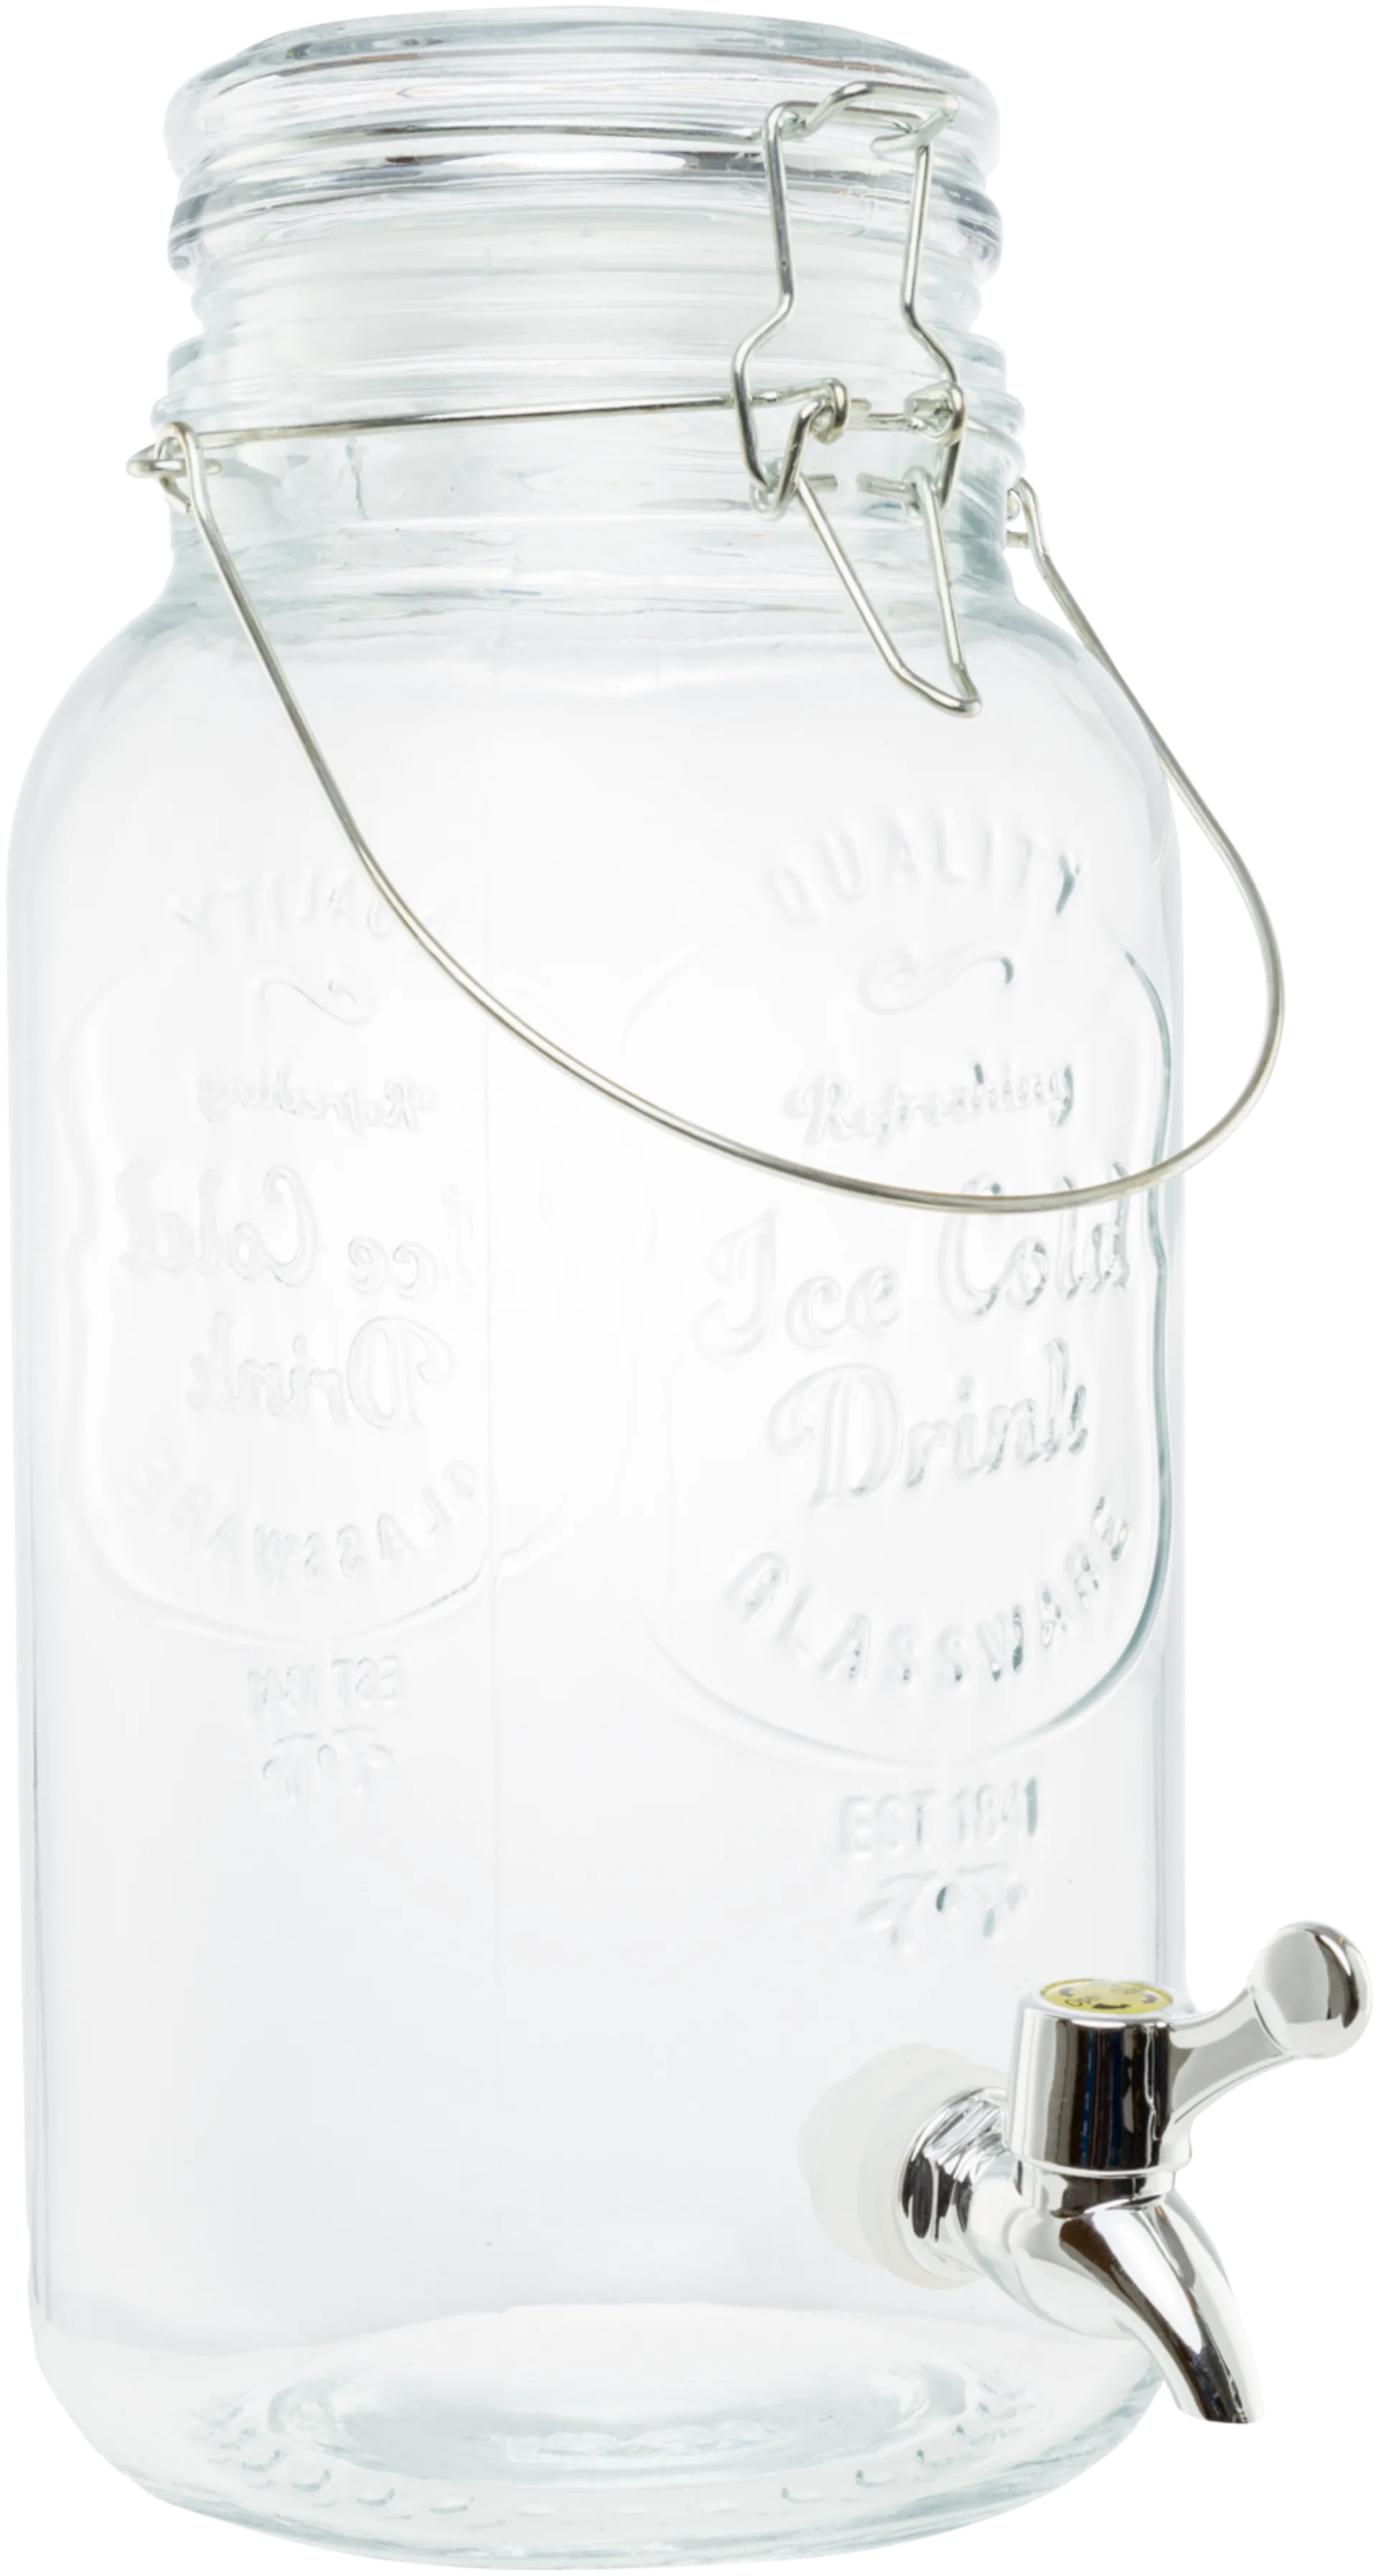 House juomakanisteri Ice cold drink 3,6 l